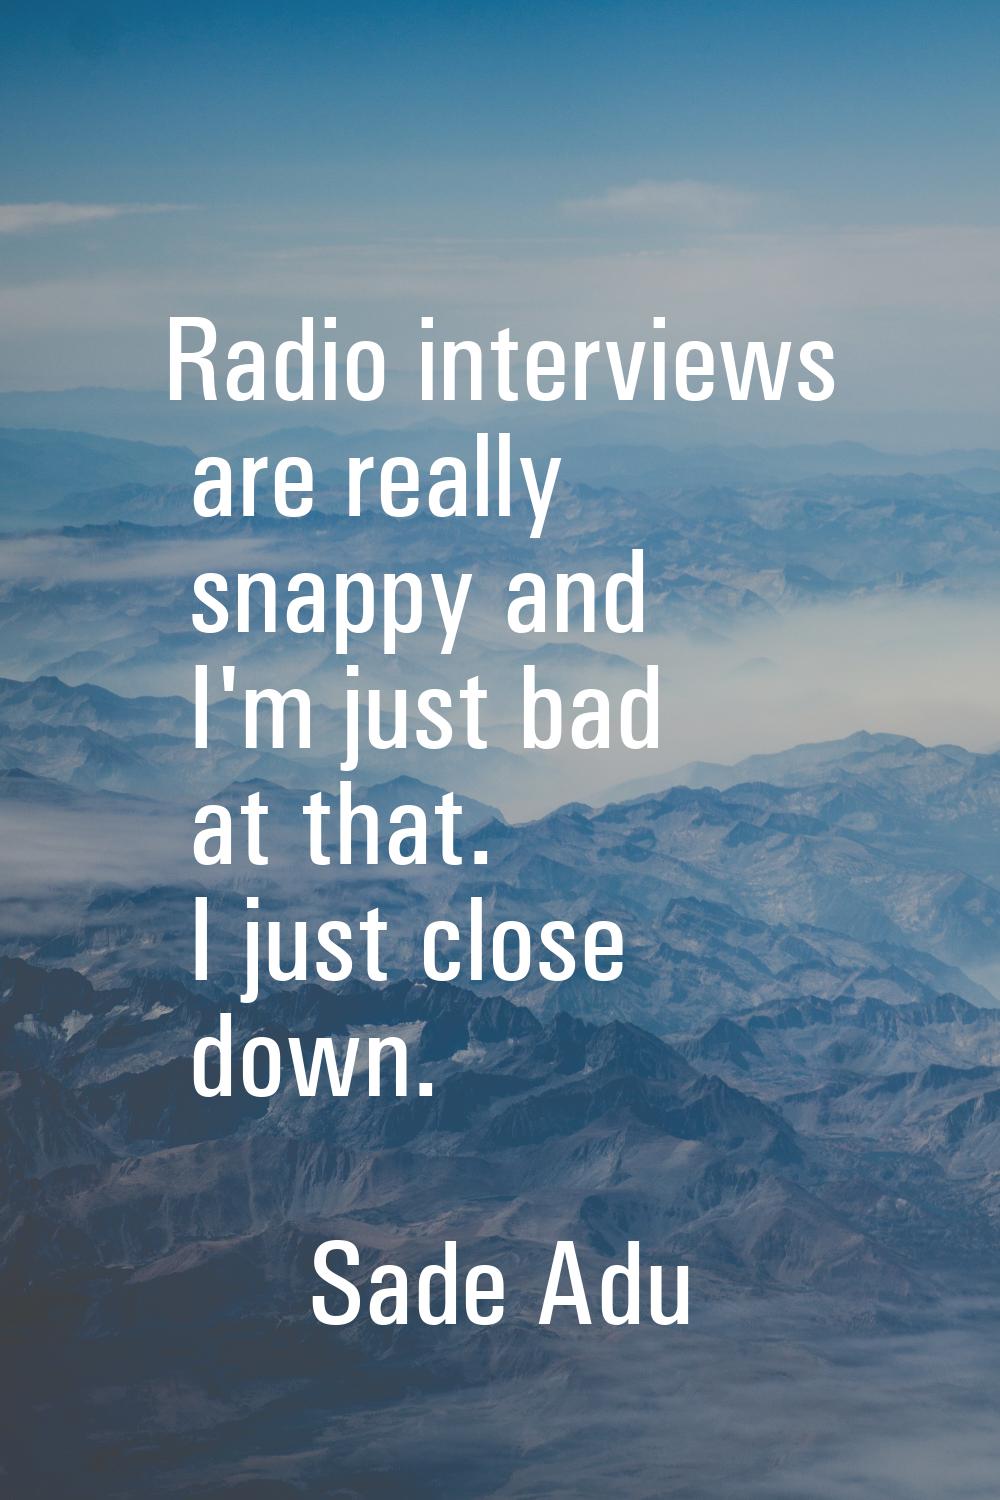 Radio interviews are really snappy and I'm just bad at that. I just close down.